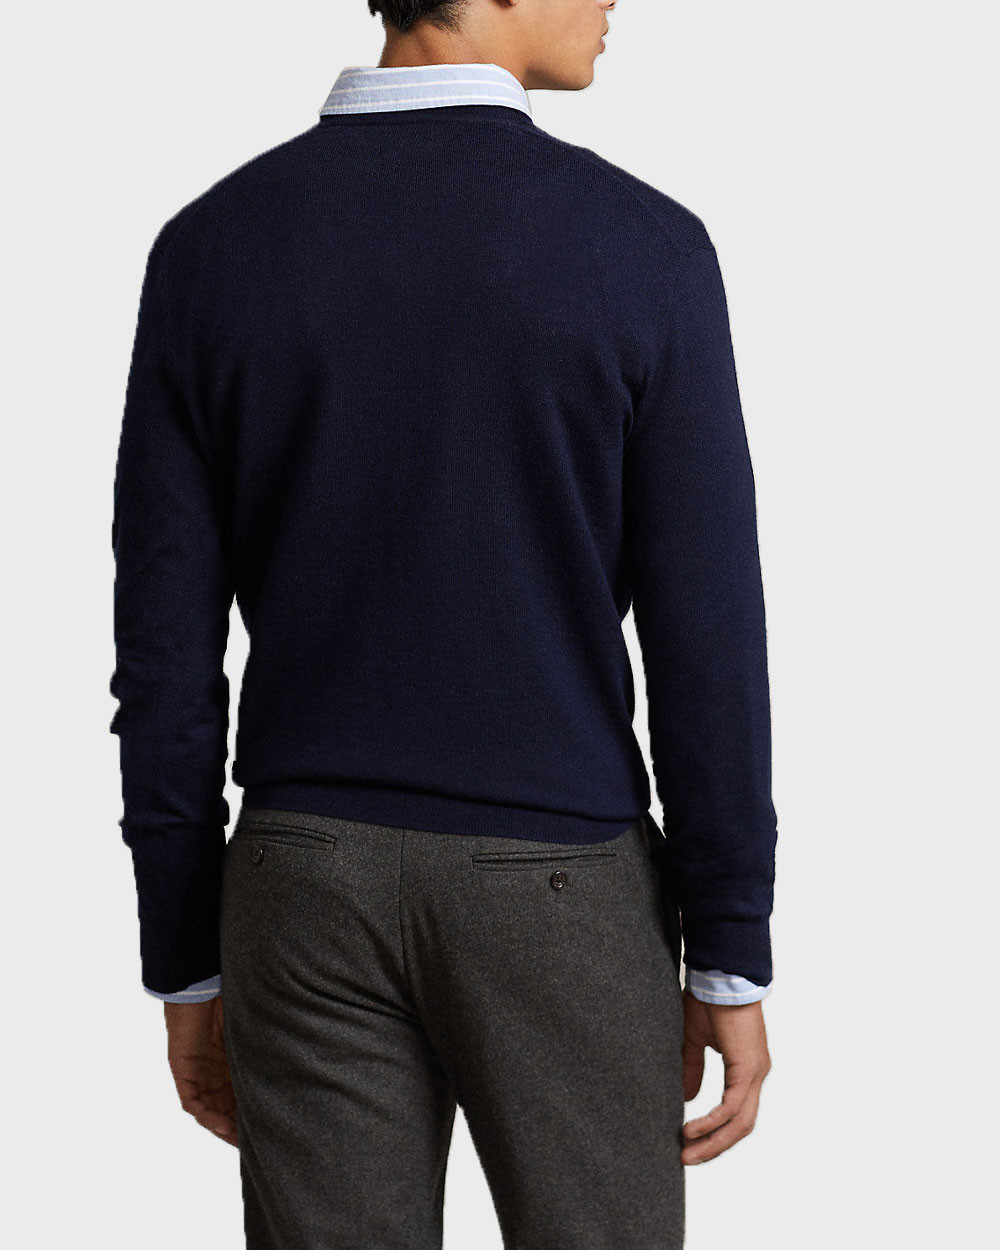 POLO RALPH LAUREN SLIM FIT WASHABLE WOOL V-NECK SWEATER